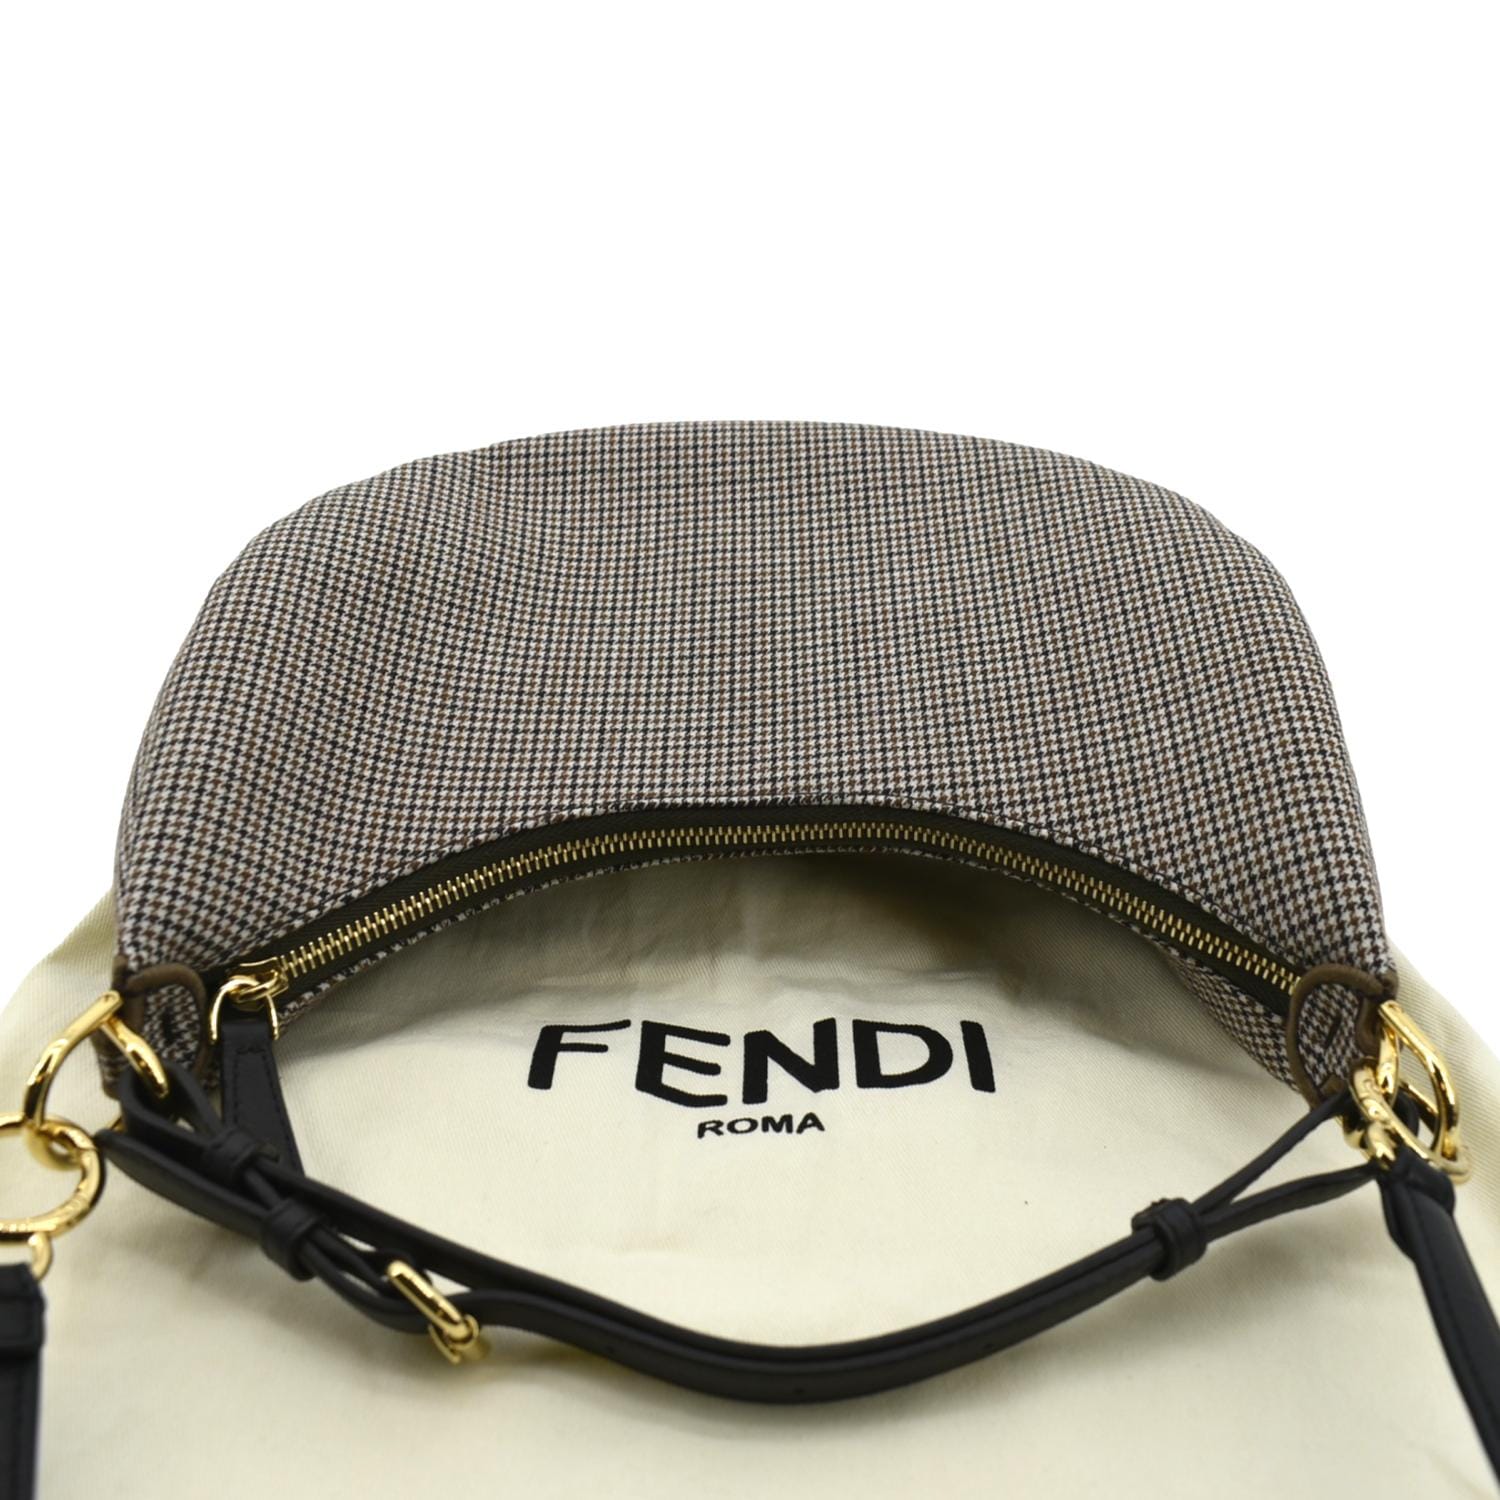 Fendi Pouch Bag in Brown